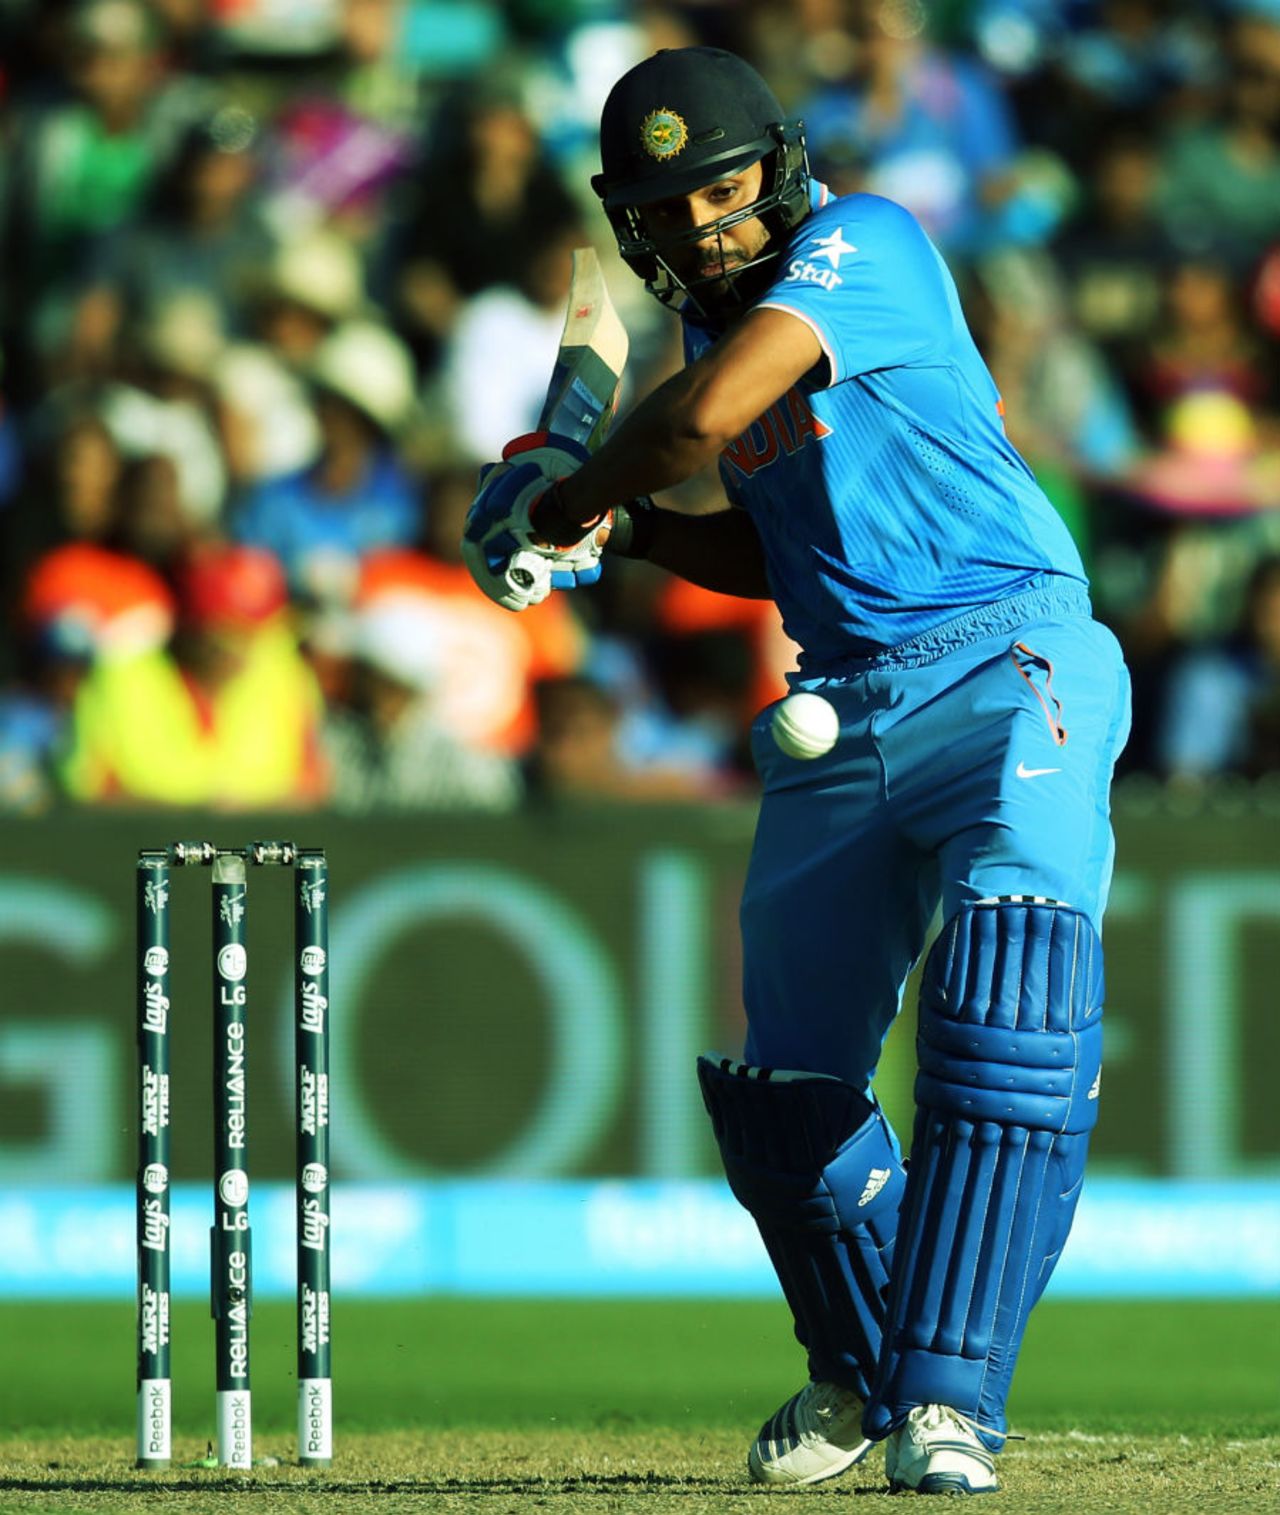 Eyes on the ball: Rohit Sharma lines up to play a shot, India v Ireland, World Cup 2015, Group B, Hamilton, March 10, 2015